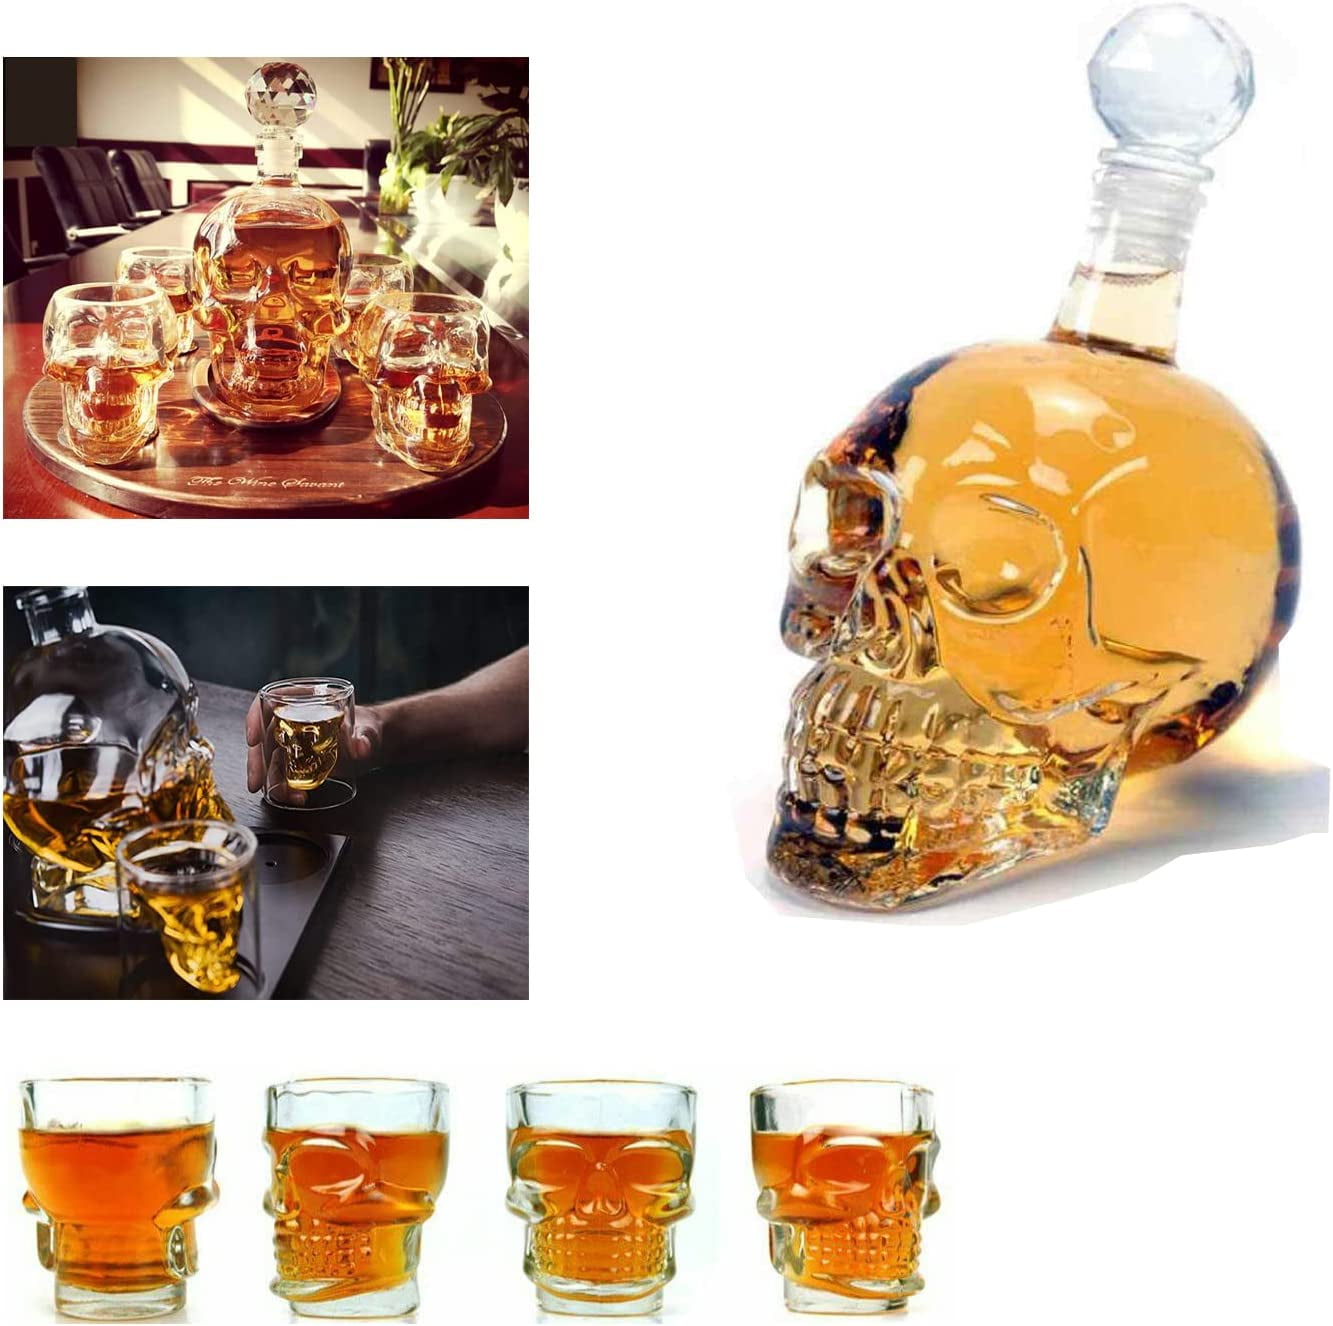 Whiskey Decanter Set With 2 Glasses, Transparent Creative Flask Carefe,  Whiskey Carafe for Wine, Scotch, Bourbon, Vodka, Liquor - 750ml Christmas  Gift